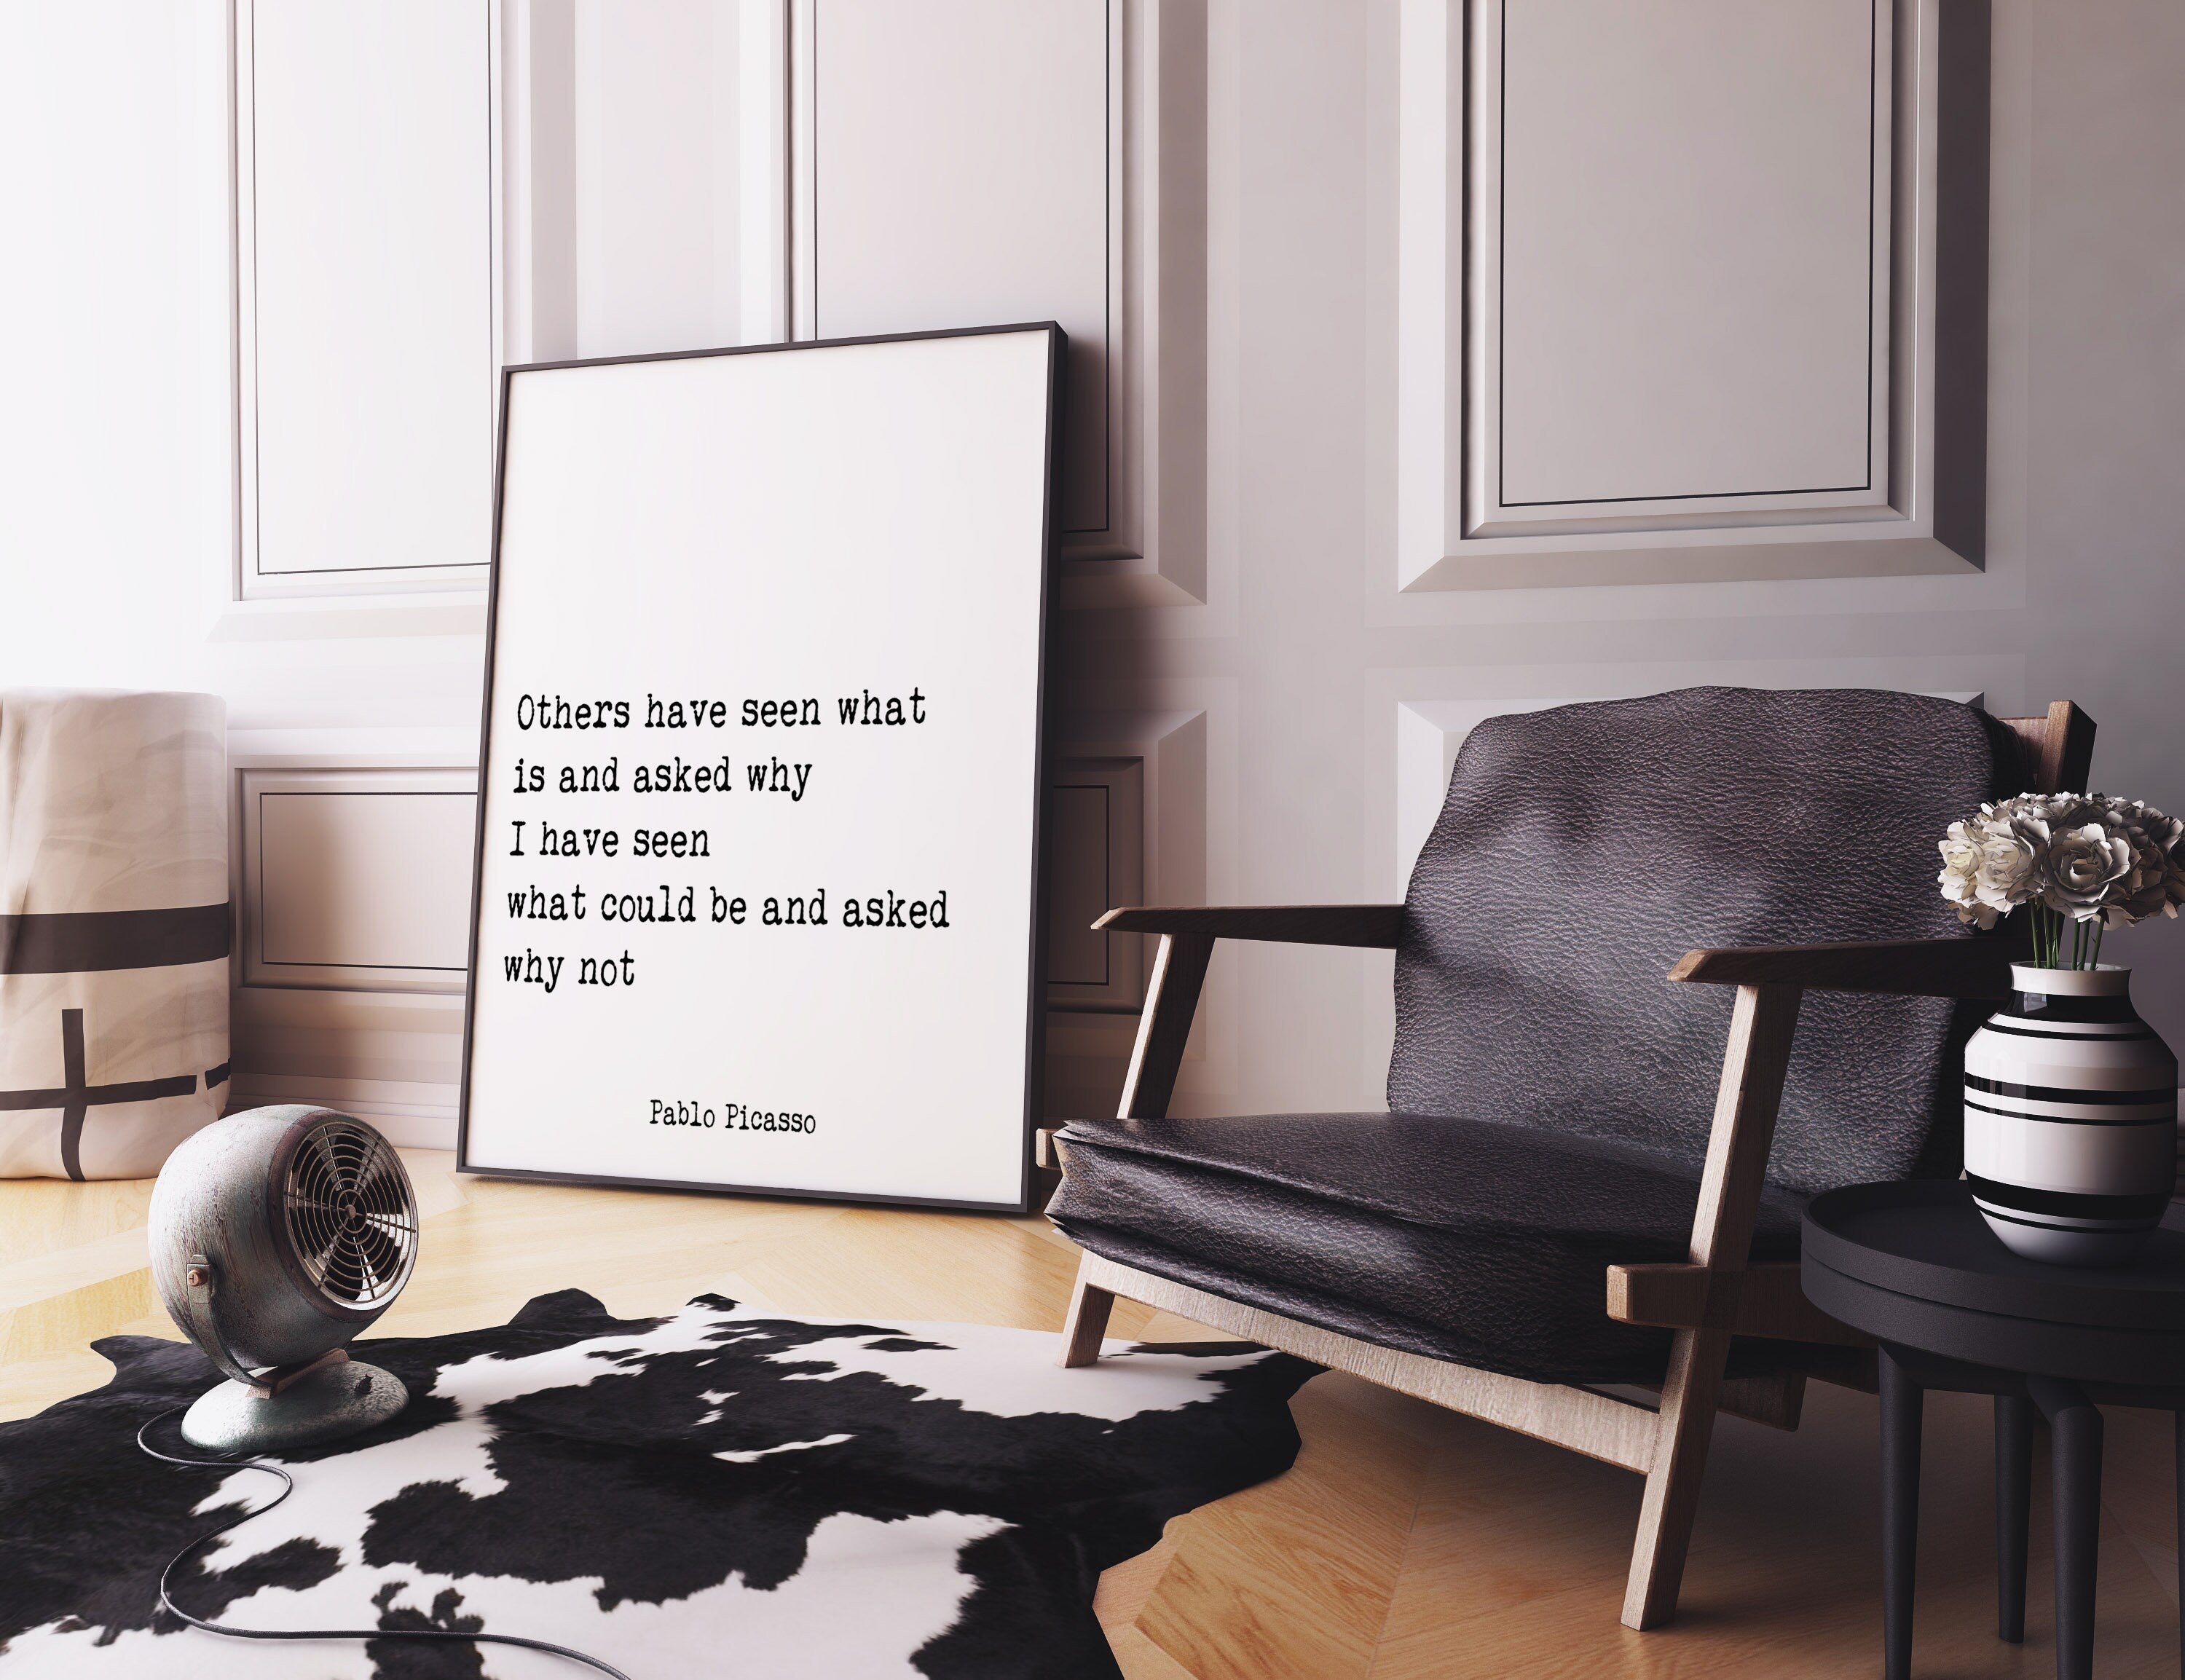 Pablo Picasso Quote Print, Others have seen what is and asked why